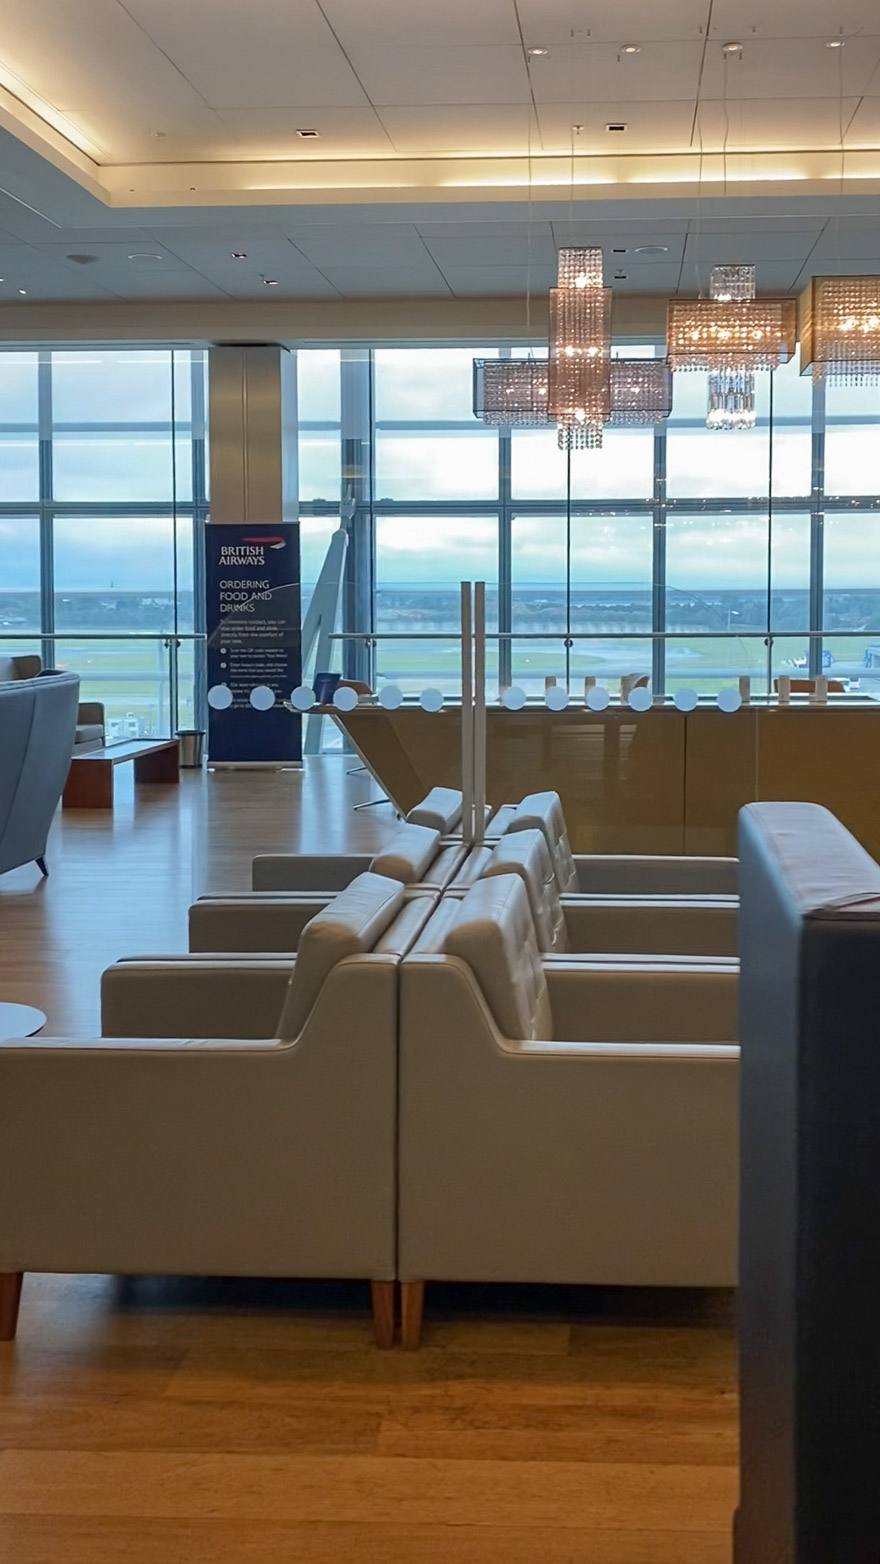 covid flounge 9 - REVIEW - British Airways : Galleries First Class Lounge & Concorde Terrace - London (LHR-T5) - [COVID-era]